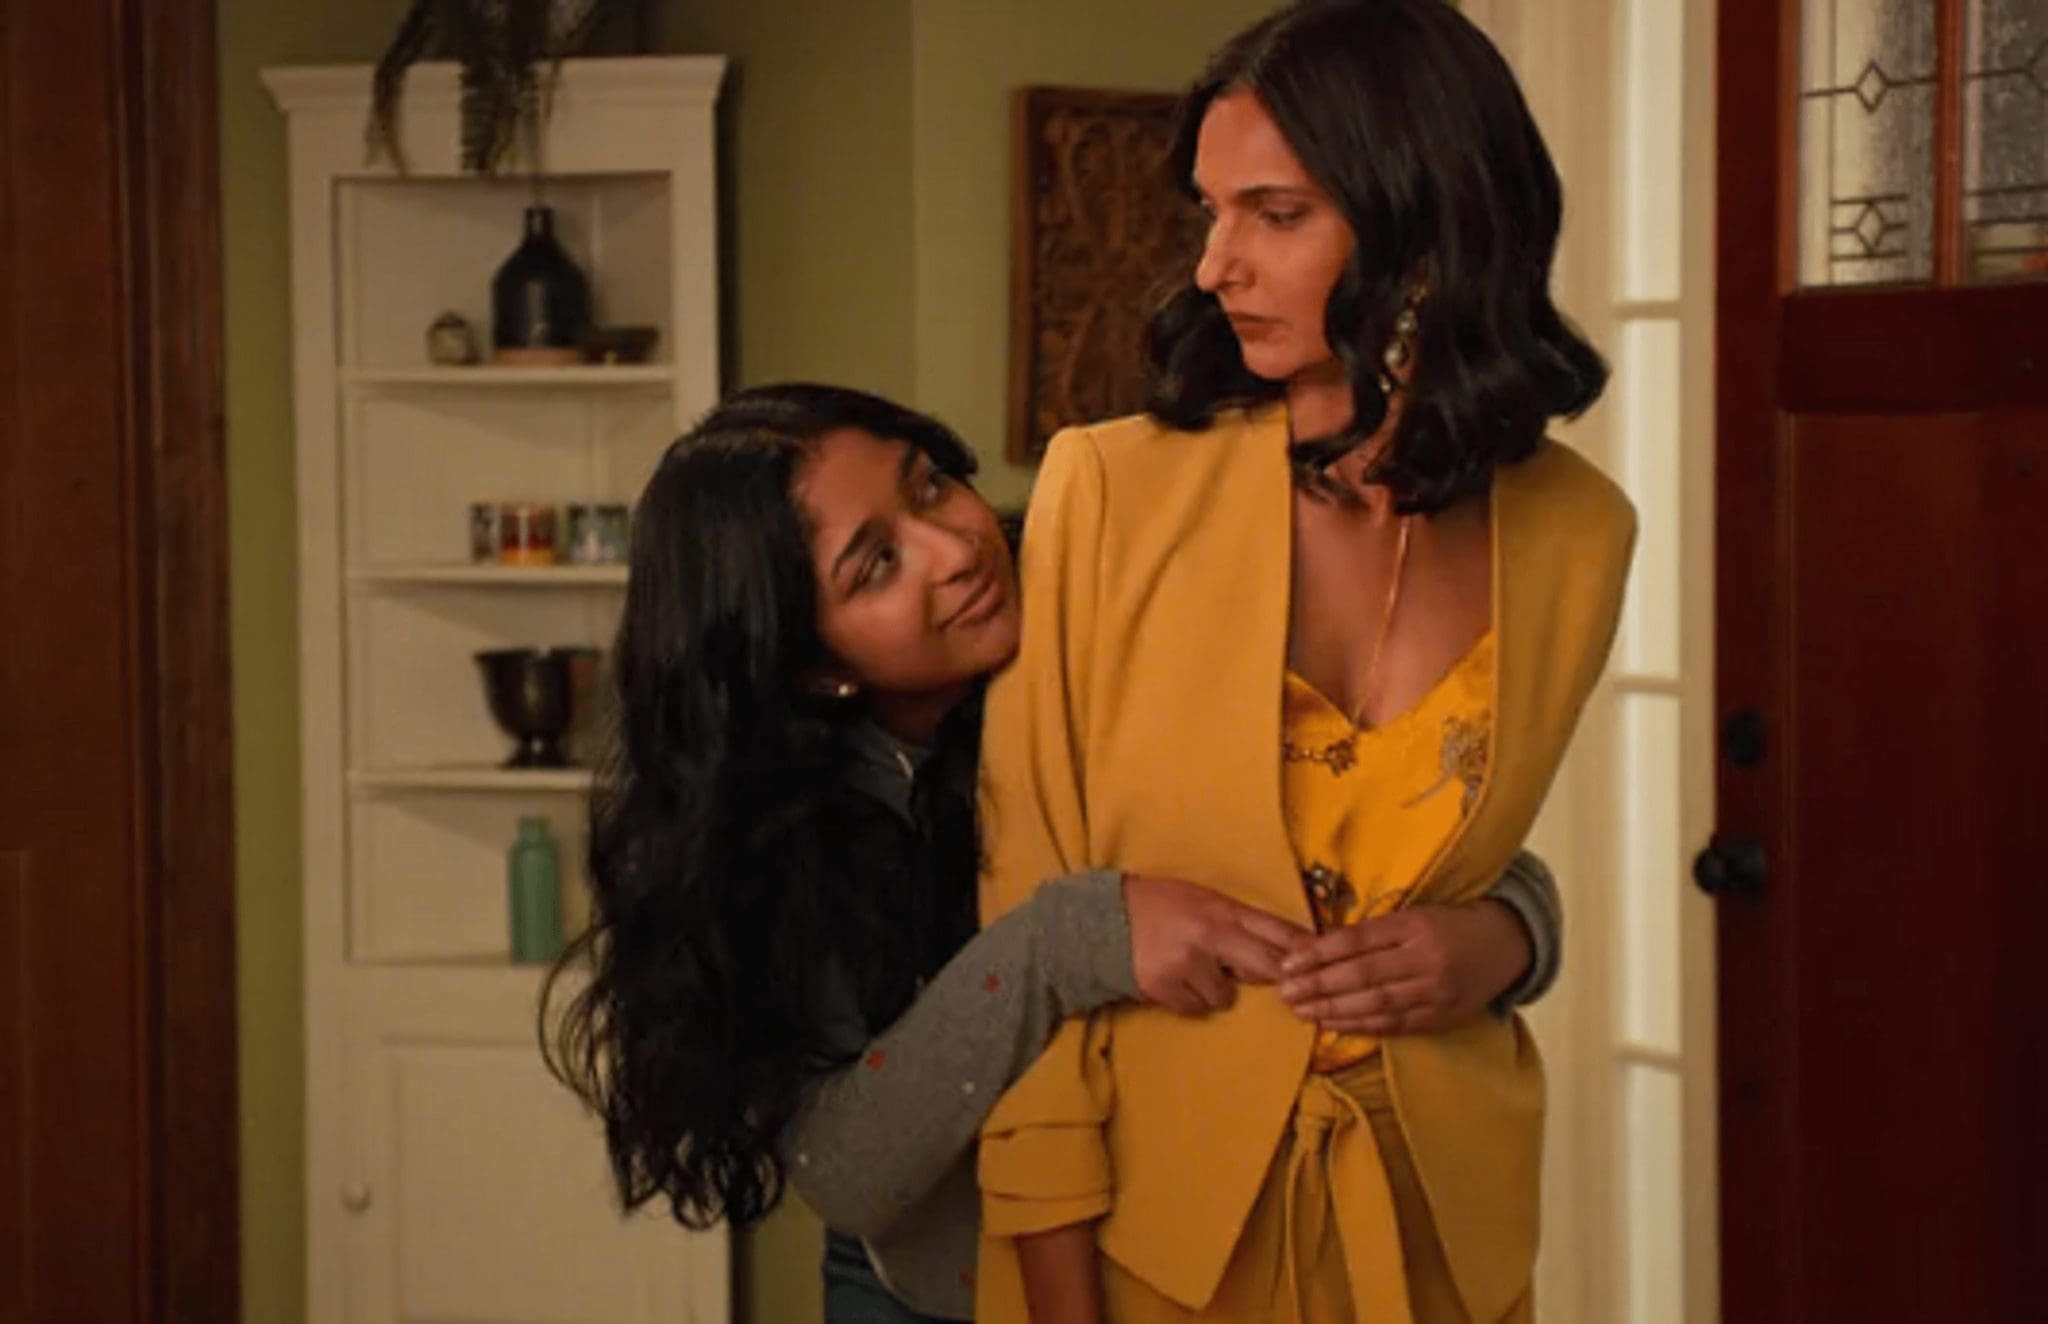 In An Interview With People, Mindy Kaling Also Discussed The Extraordinarily Favorable Response She Got From The Netflix Series' Viewers, Calling It The 'Greatest Surprise'